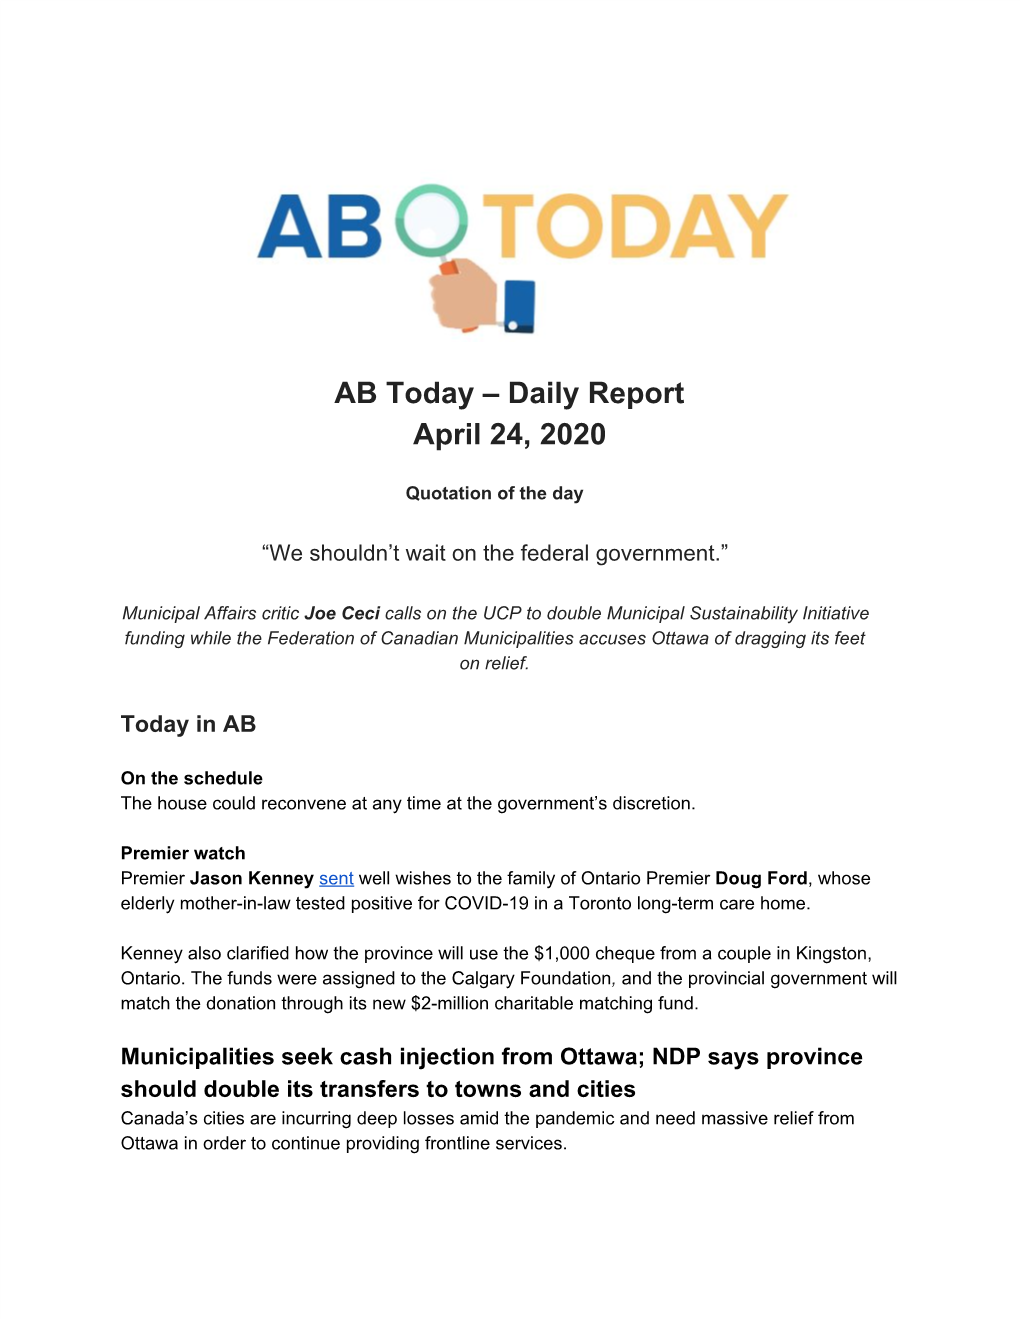 AB Today – Daily Report April 24, 2020